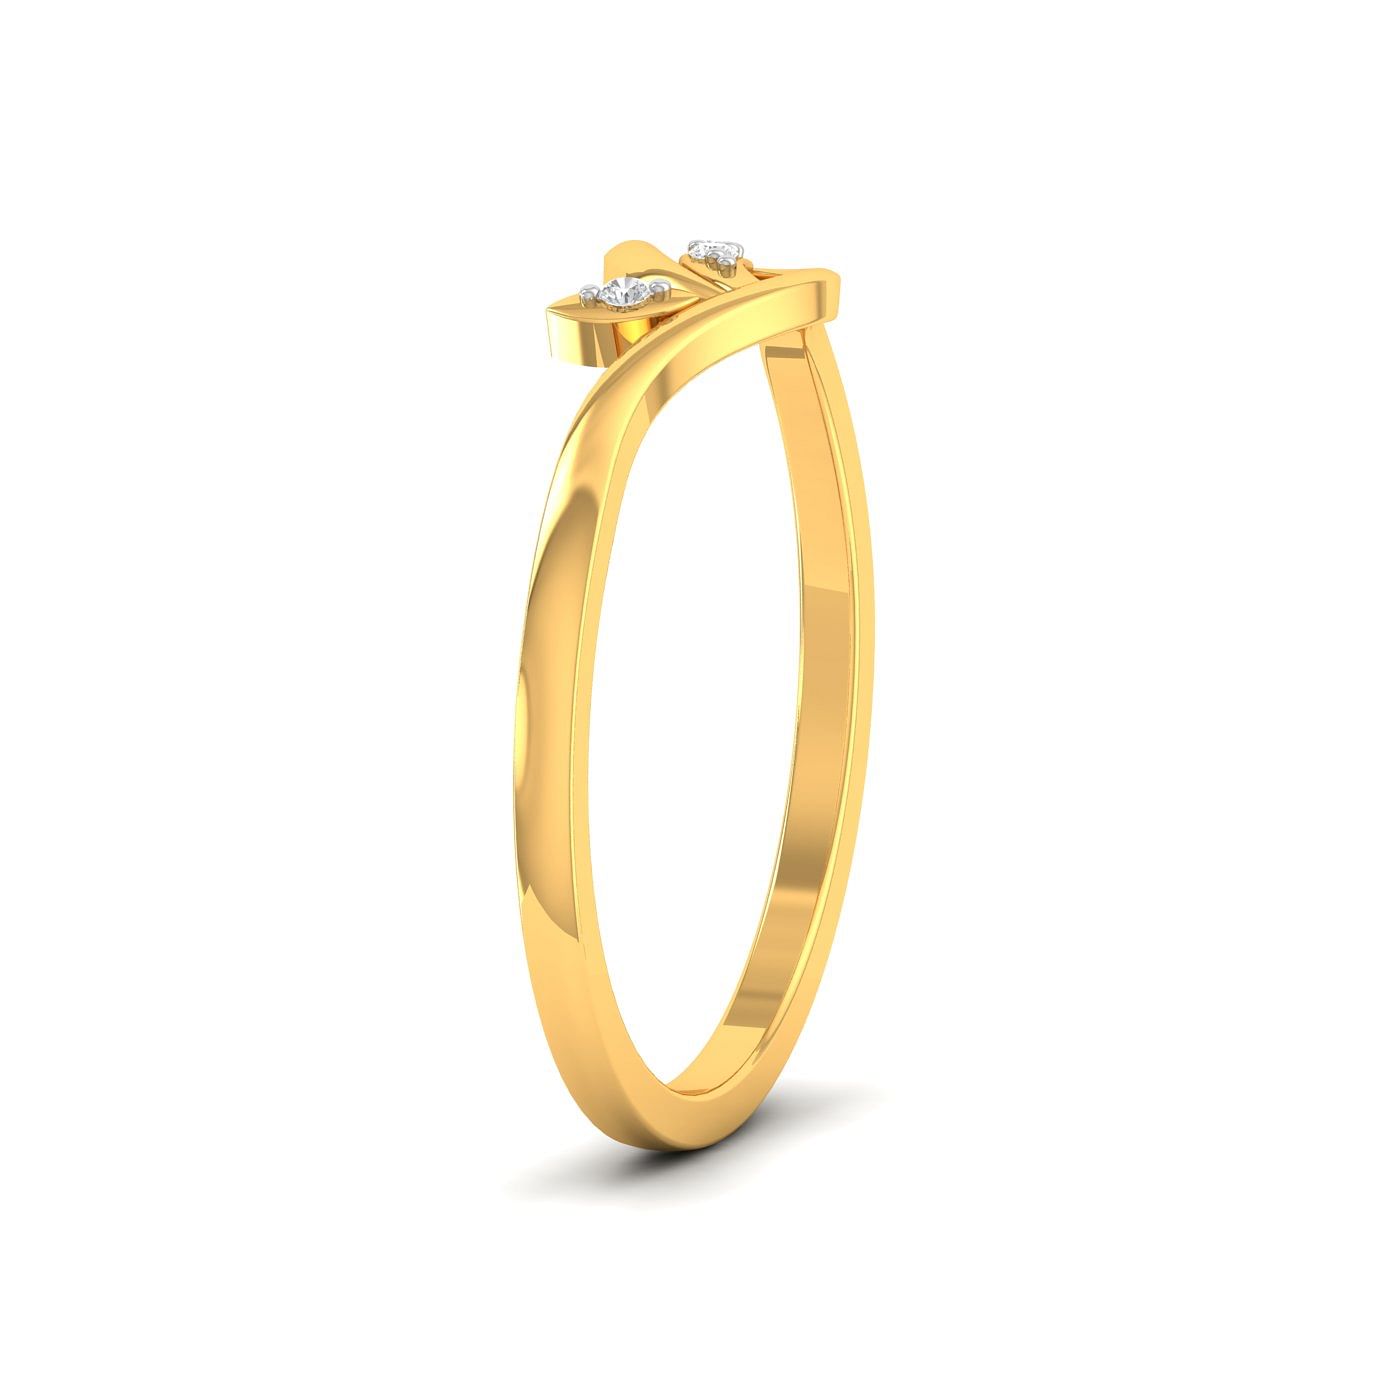 Light weight yellow gold Appy Three Stone Diamond Ring for her